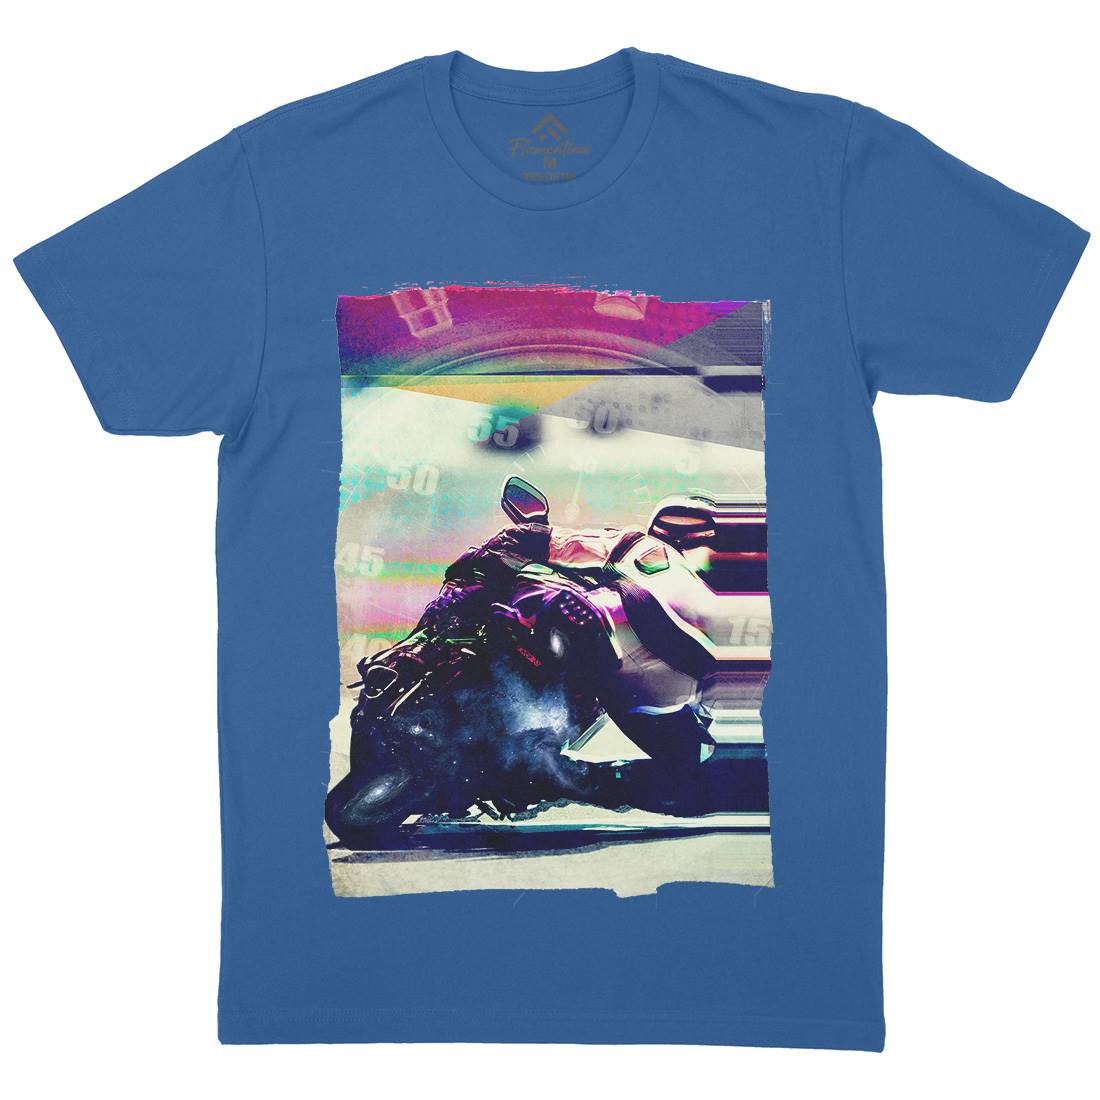 On Time Mens Crew Neck T-Shirt Motorcycles A891